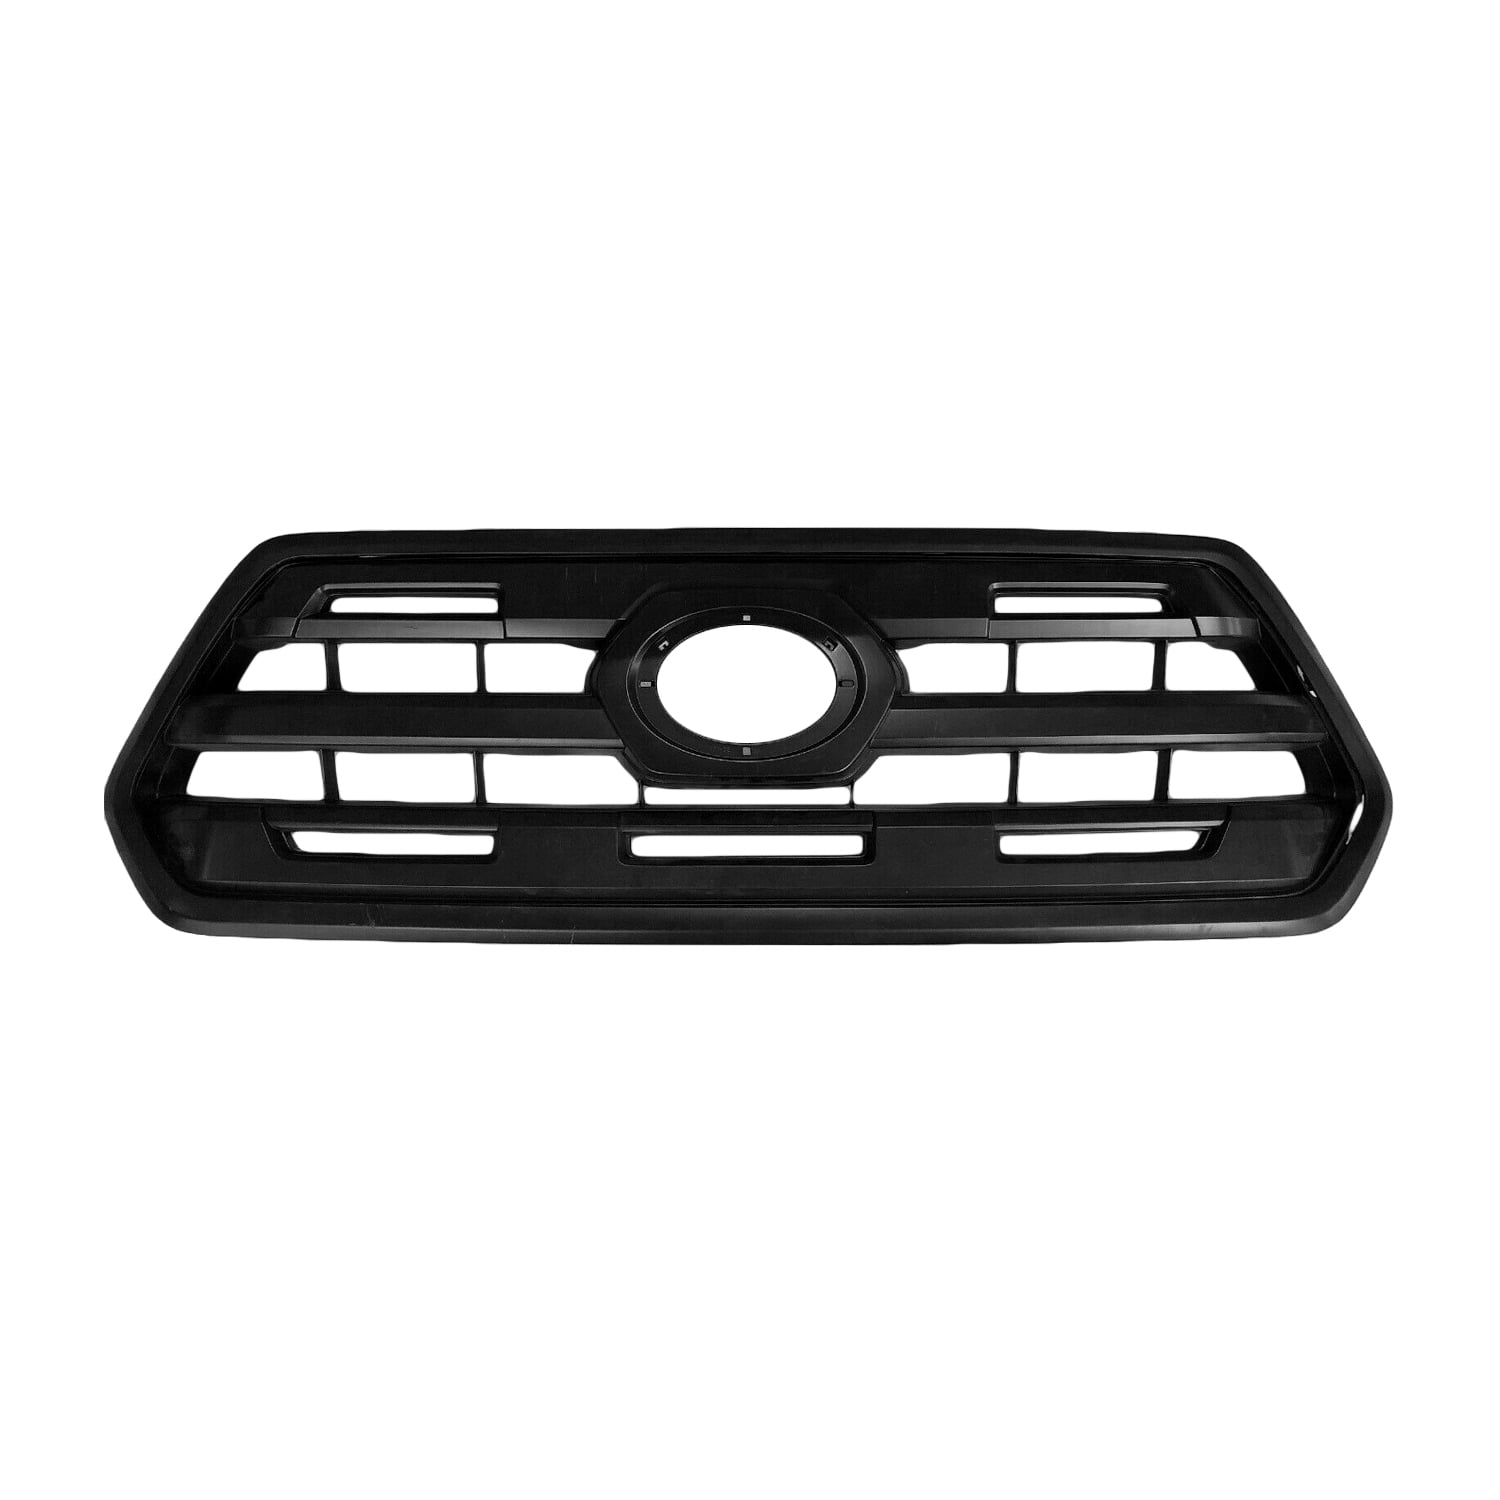 Grille Assembly Compatible with 2003-2006 Toyota Tundra ABS Plastic Painted Black Shell and Insert Regular/Access Cab Base Model 